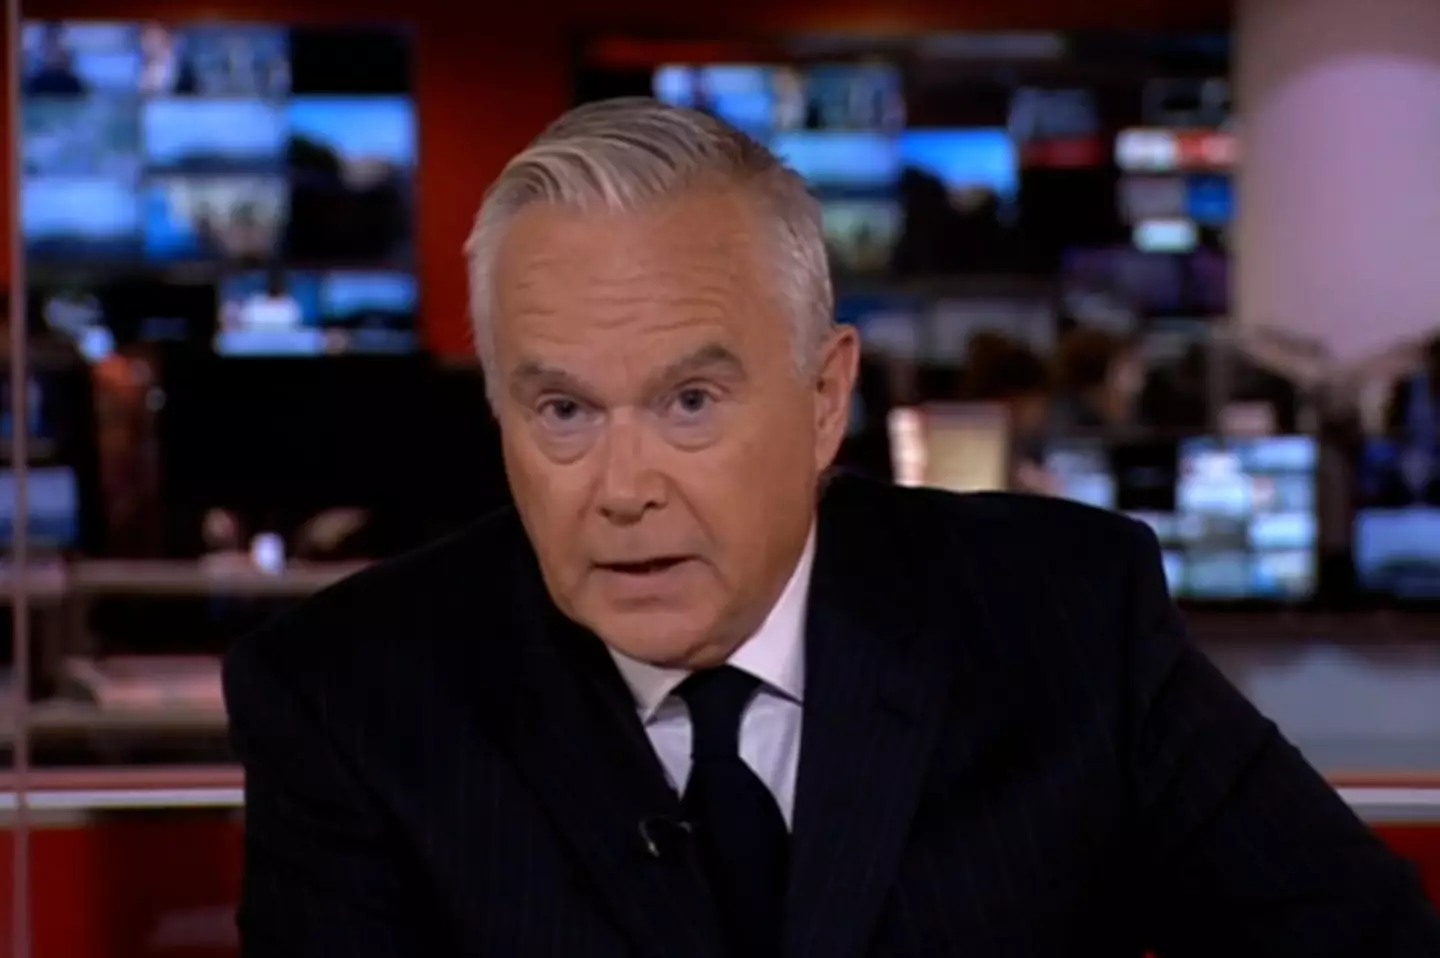 Huw Edwards has been named as the BBC presenter at the center of the allegations.